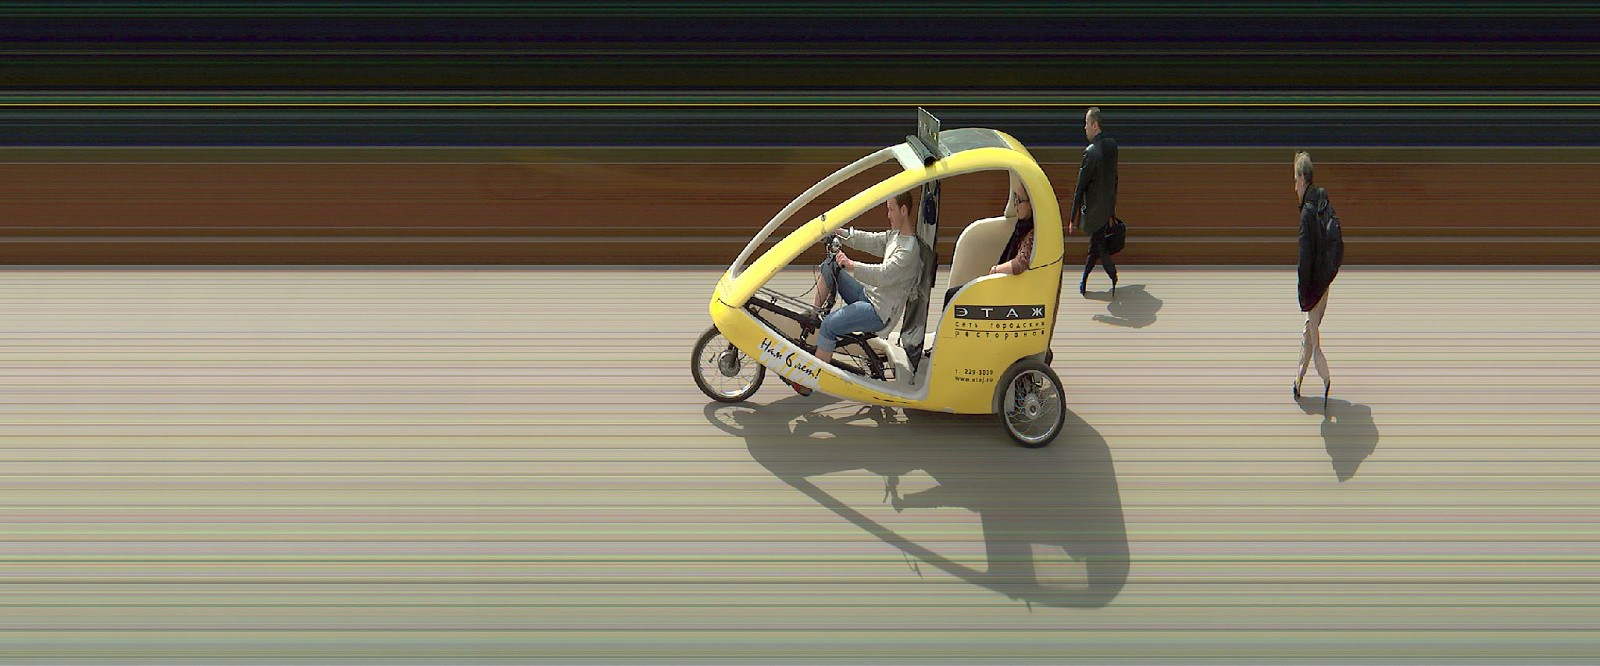 Jay Mark Johnson, MOSCOW TRICYCLE #1, 2008 Moscow RU
archival pigment on paper, mounted on aluminum, 40 x 96 in. (101.6 x 243.8 cm)